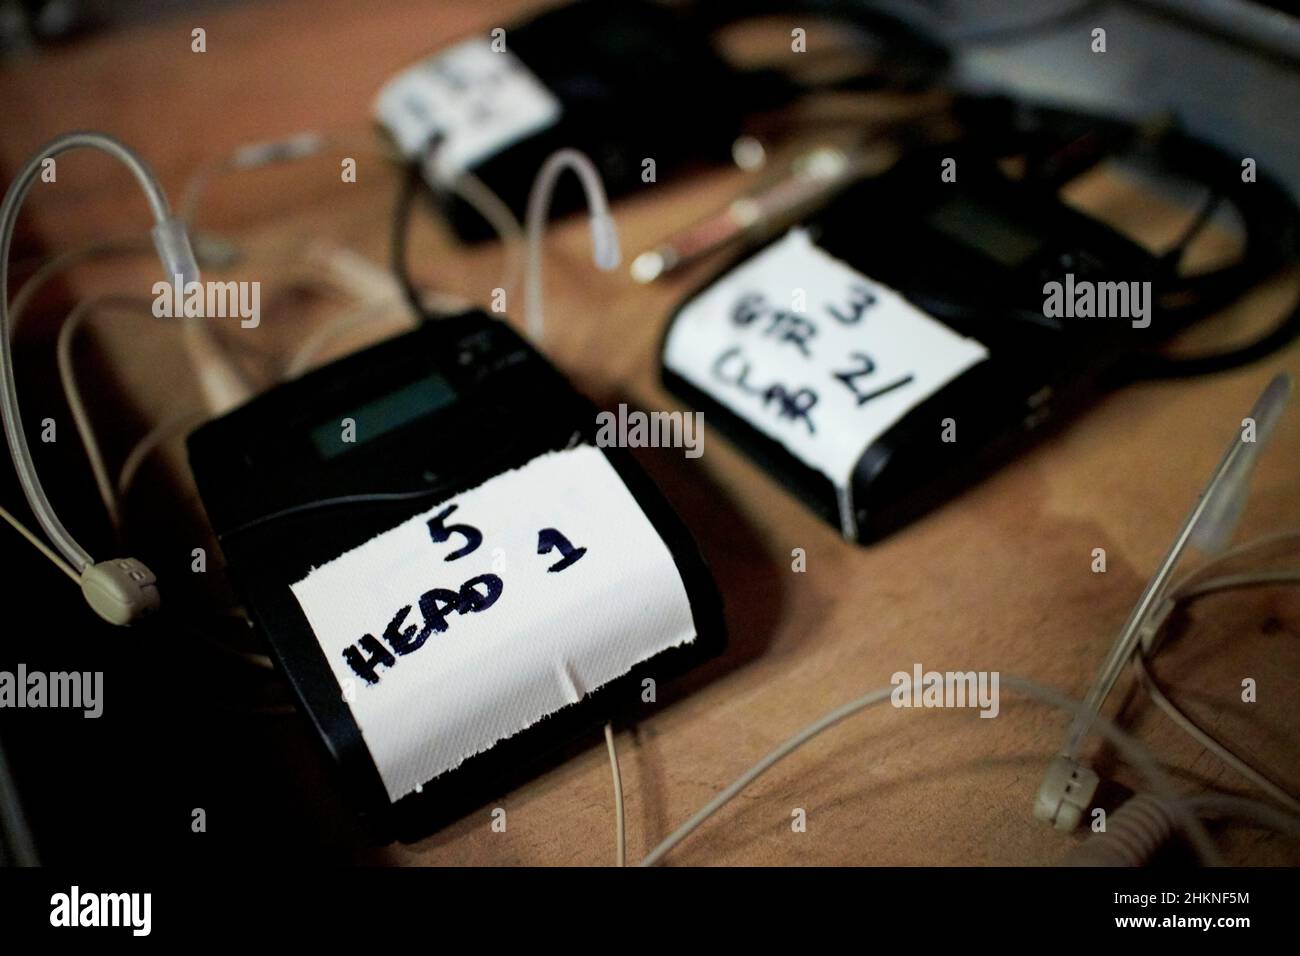 radio mics and earpieces ready backstage before a production Stock Photo